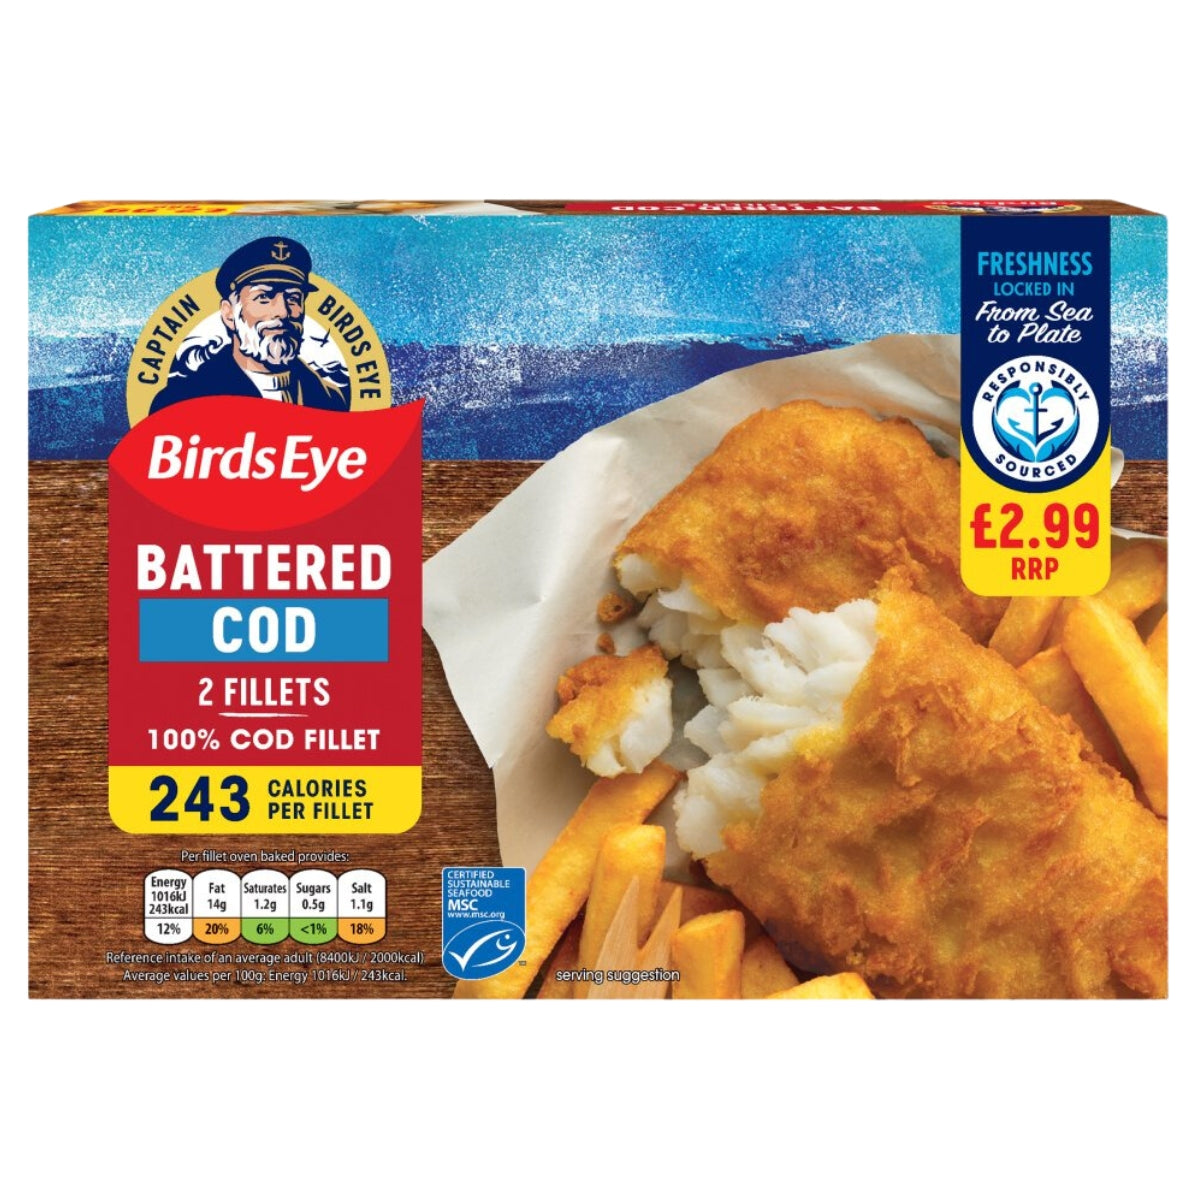 A box of Birds Eye - Battered Cod 2 Fillets - 200g with fries.